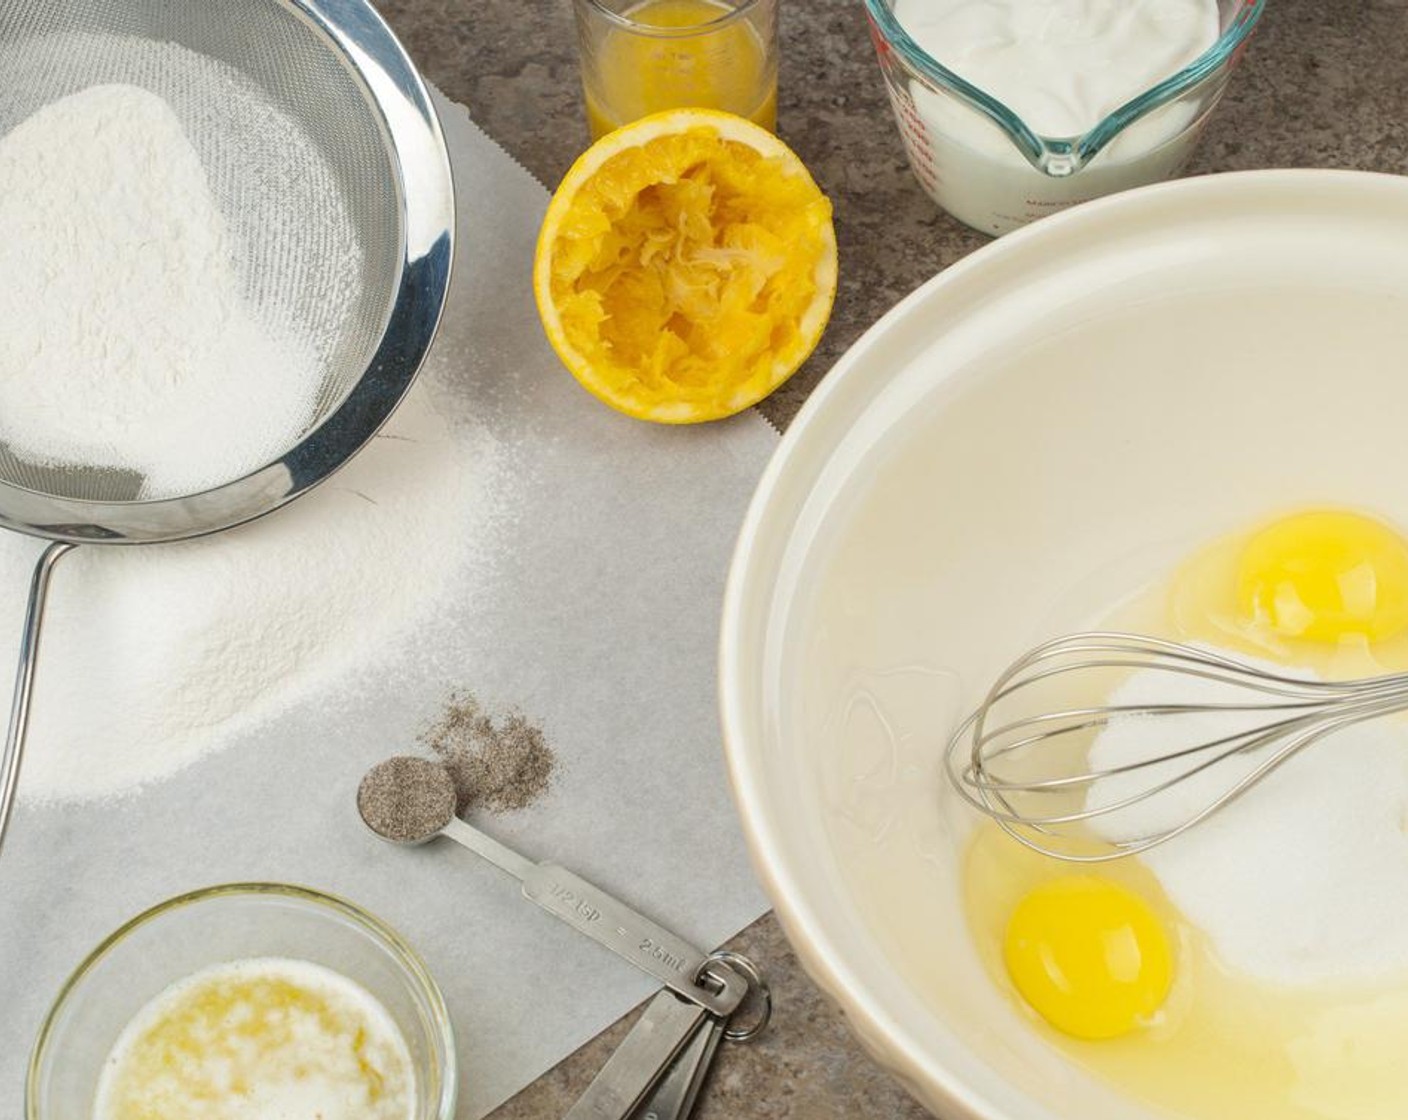 step 3 In a large bowl using an electric mixer beat together Granulated Sugar (1 cup), Farmhouse Eggs® Large Brown Eggs (2), and 2 tsp zest from Oranges (2) until light, creamy and triple in volume, approximately 3-4 minutes.